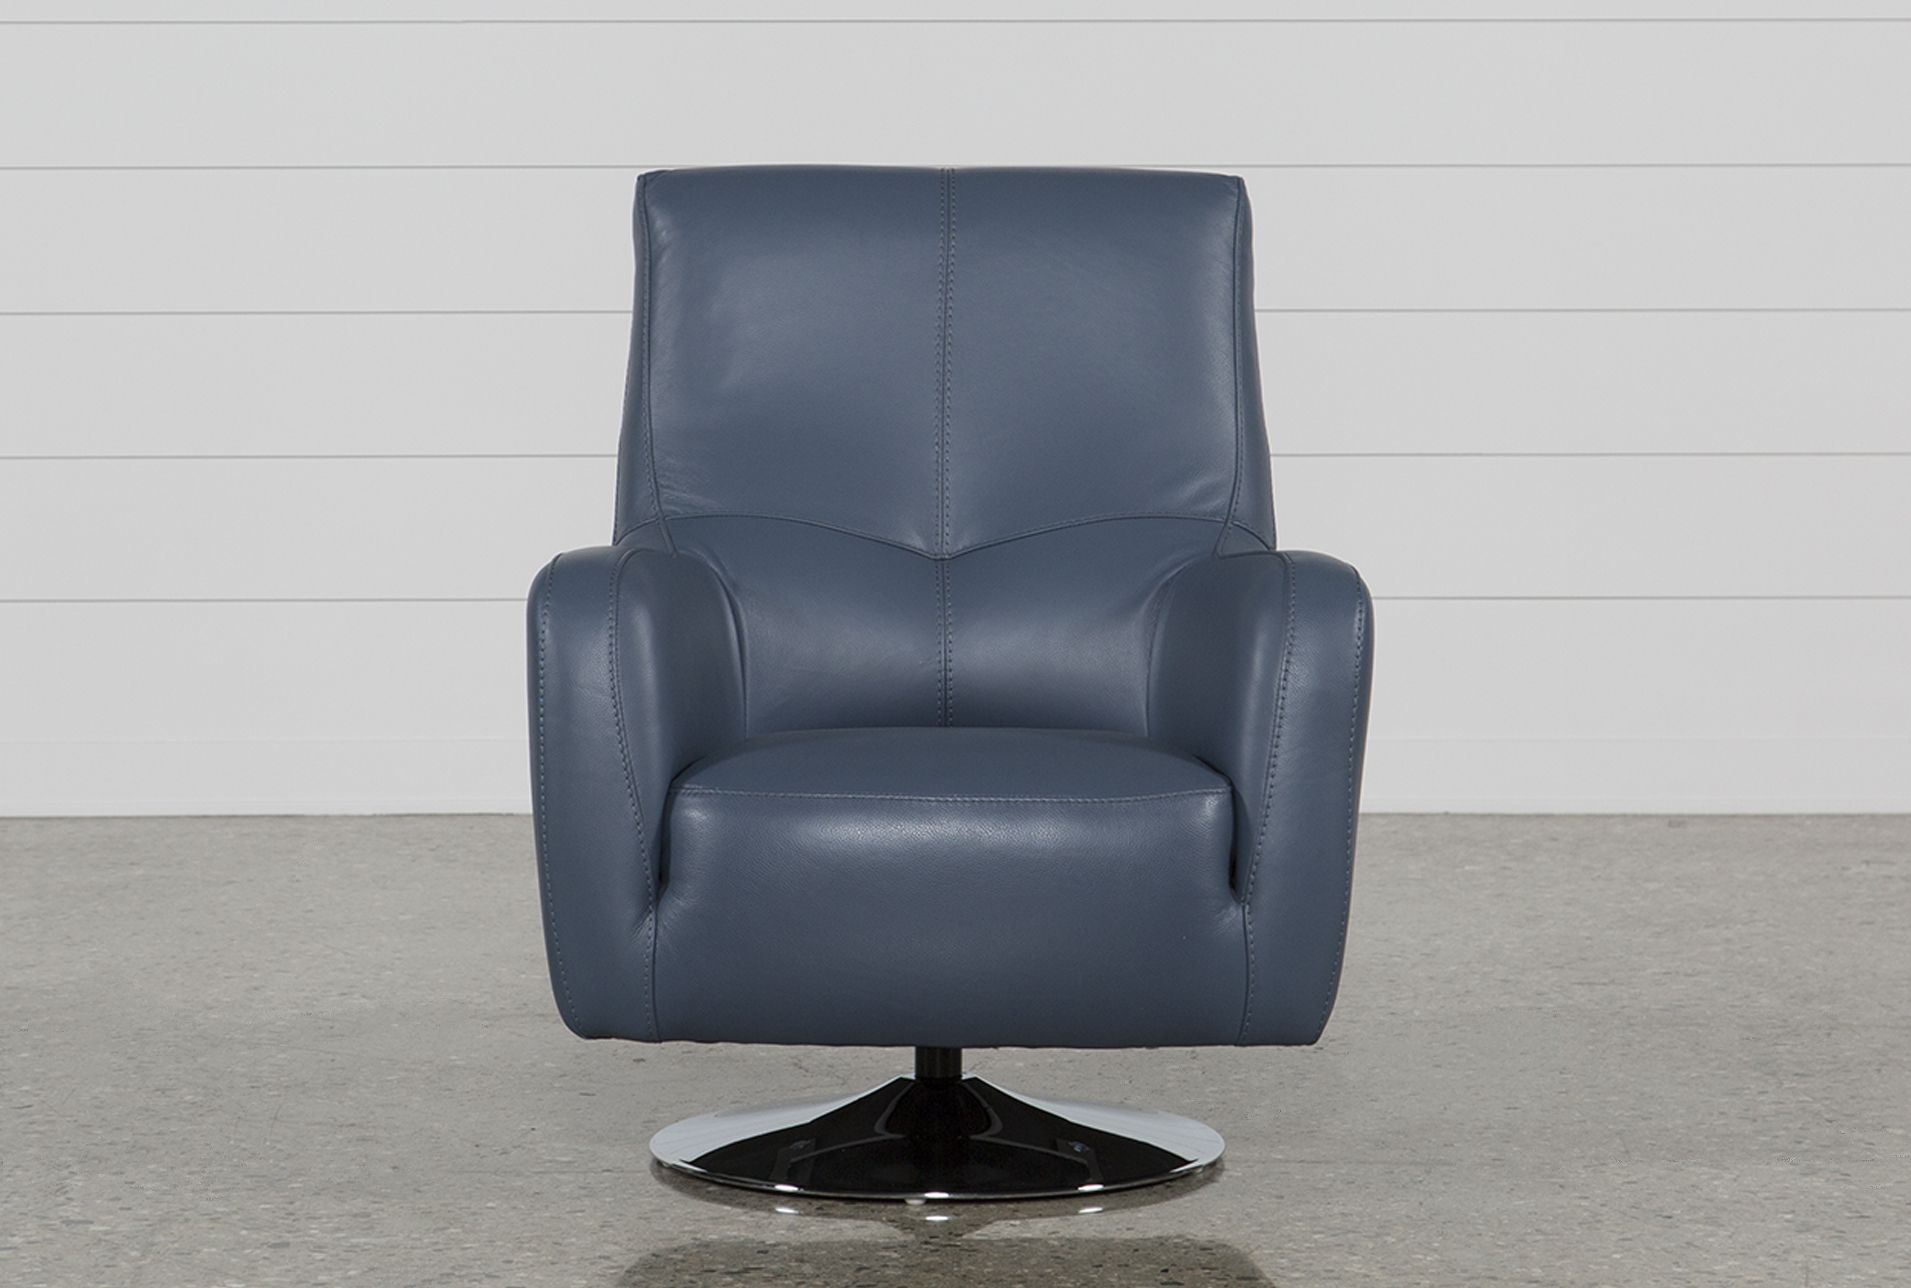 Kawai Leather Swivel Chair | Products | Pinterest | Leather Swivel In Amala Bone Leather Reclining Swivel Chairs (View 6 of 20)